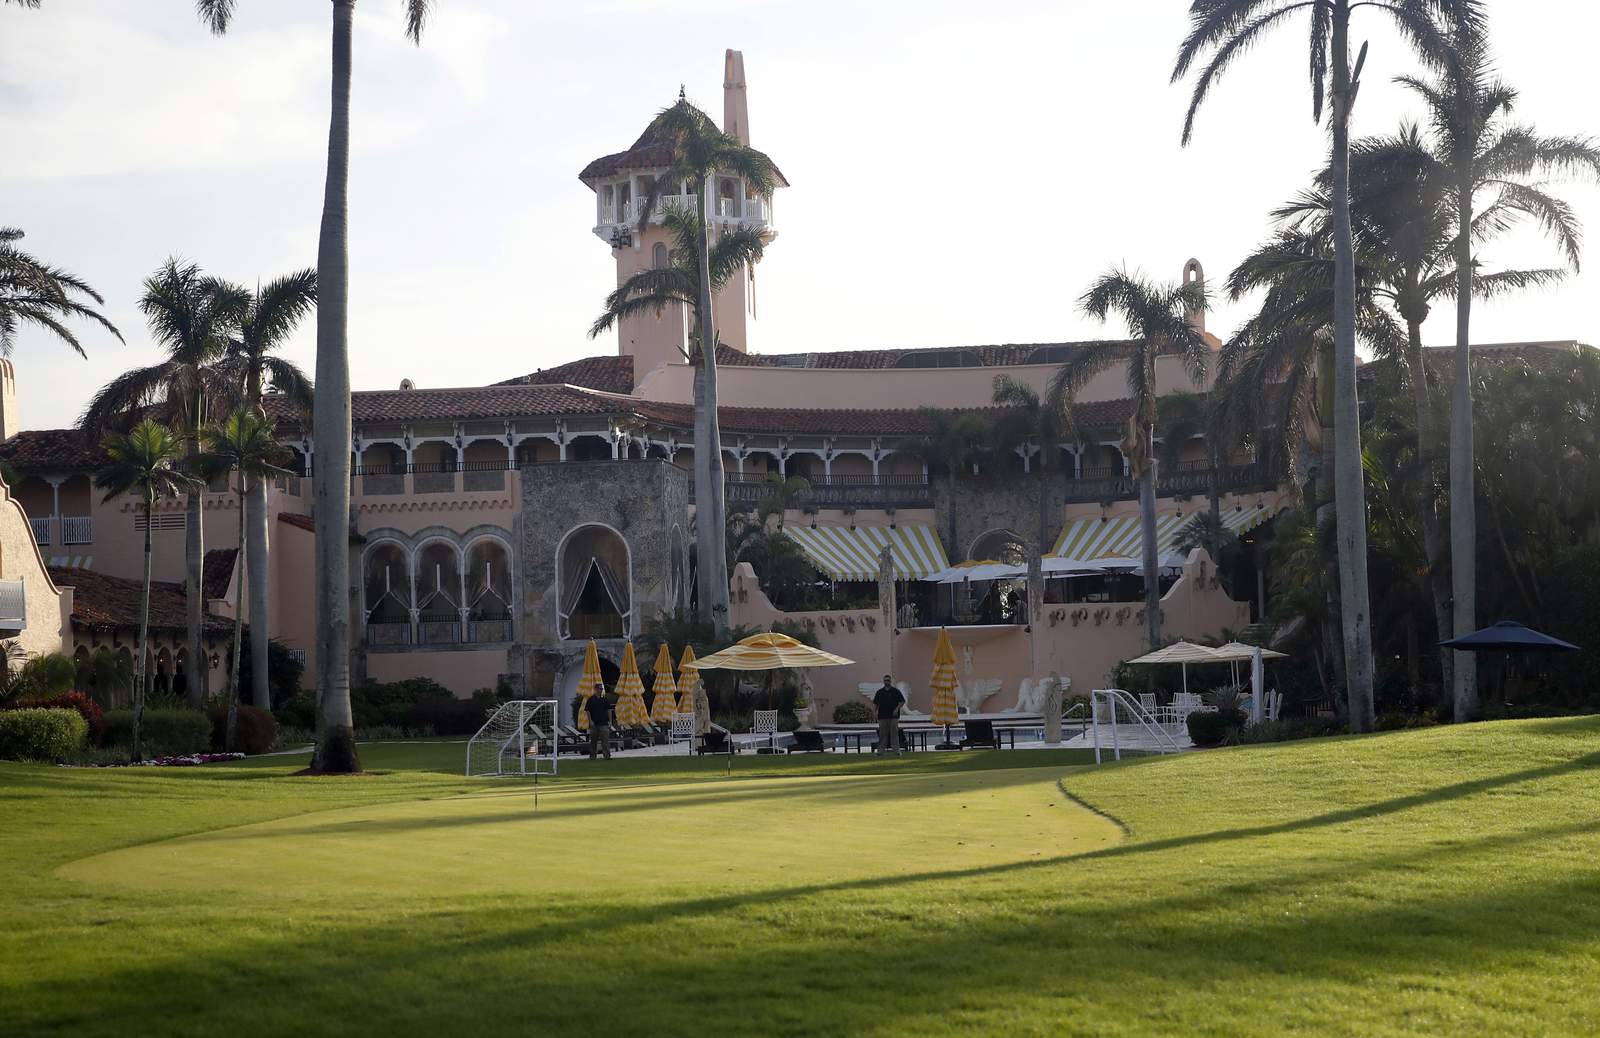 Police 3 Teens With Loaded Ak 47 Jump Wall Into President Trump S Mar A Lago Resort